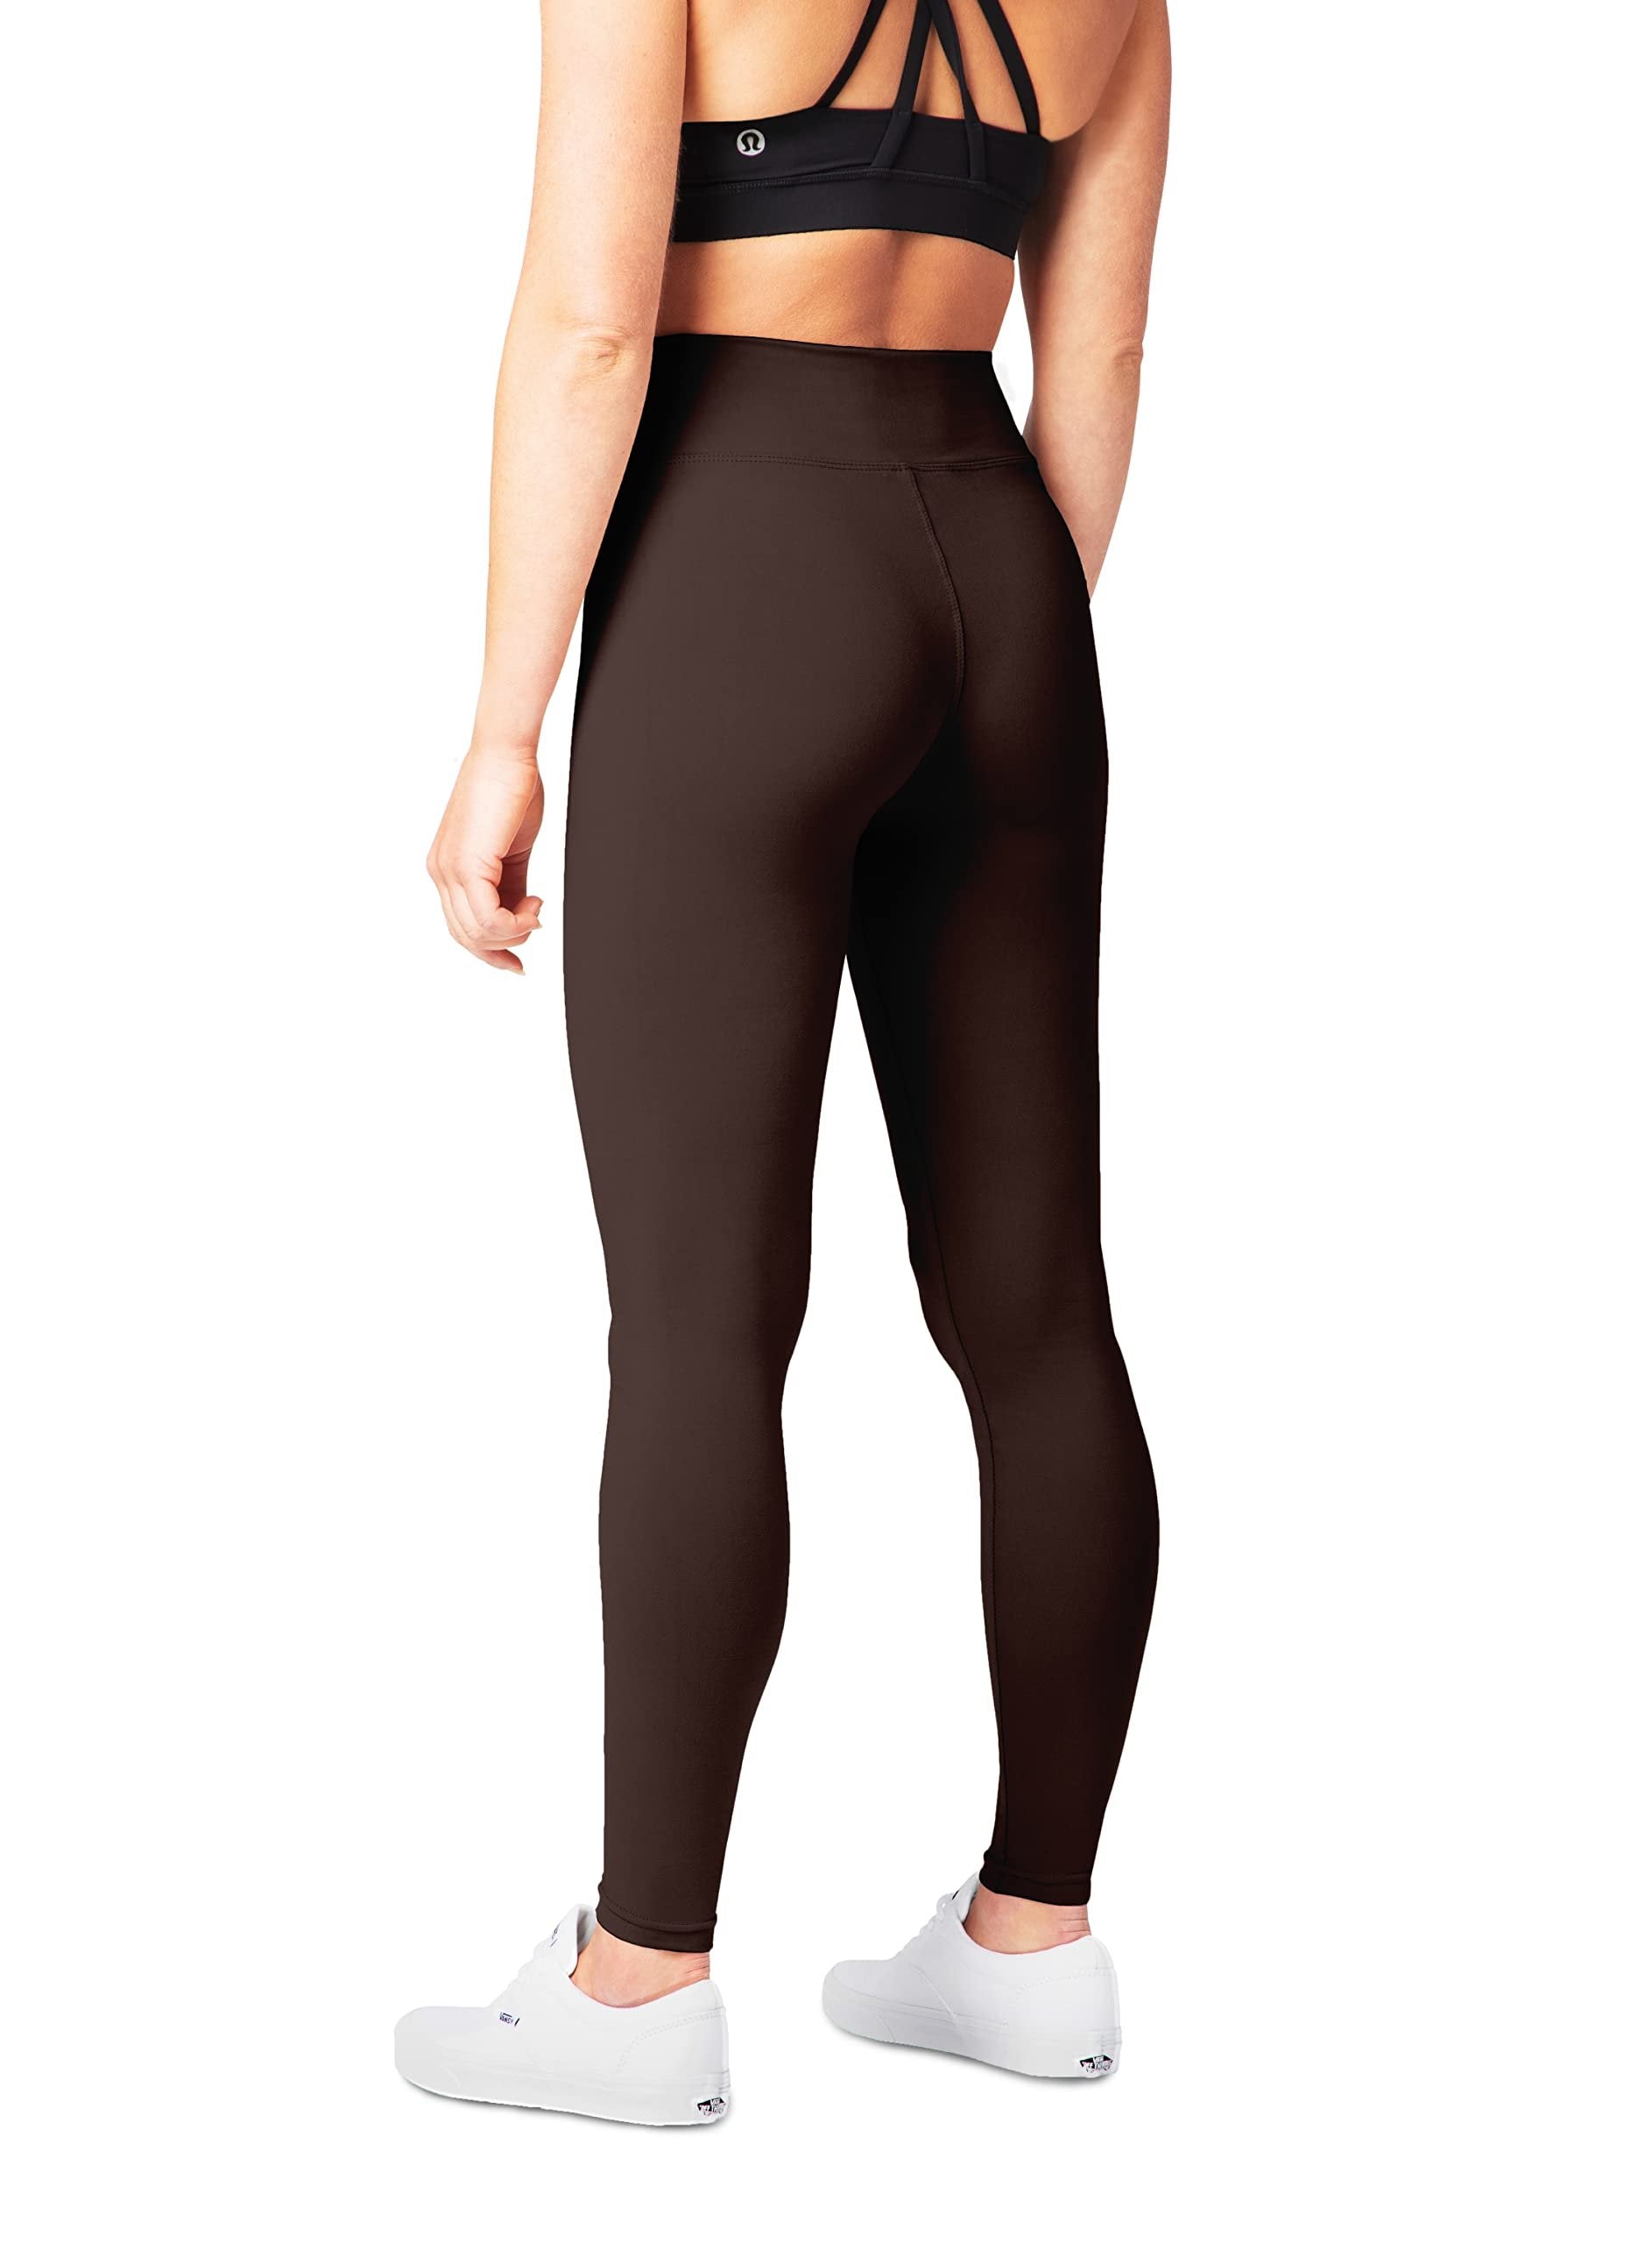 Brown Satina High Waisted Yoga Leggings, 3 Waistband, One Size, Workout & Plus Size Women